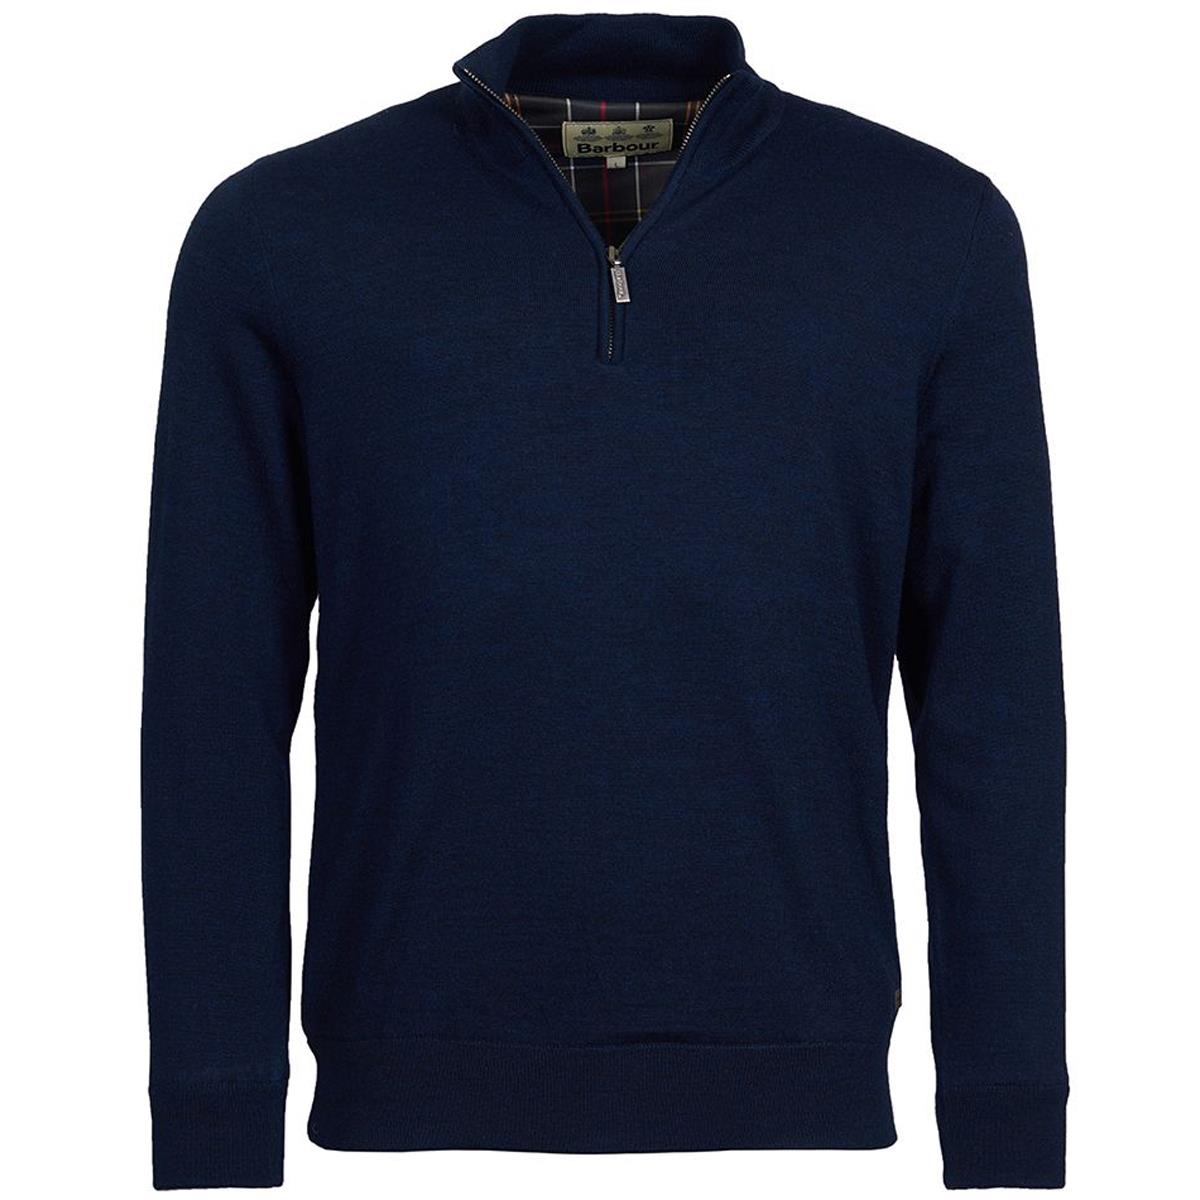 Can the Barbour Mens Gamlan Half Zip sweater be safely washed?